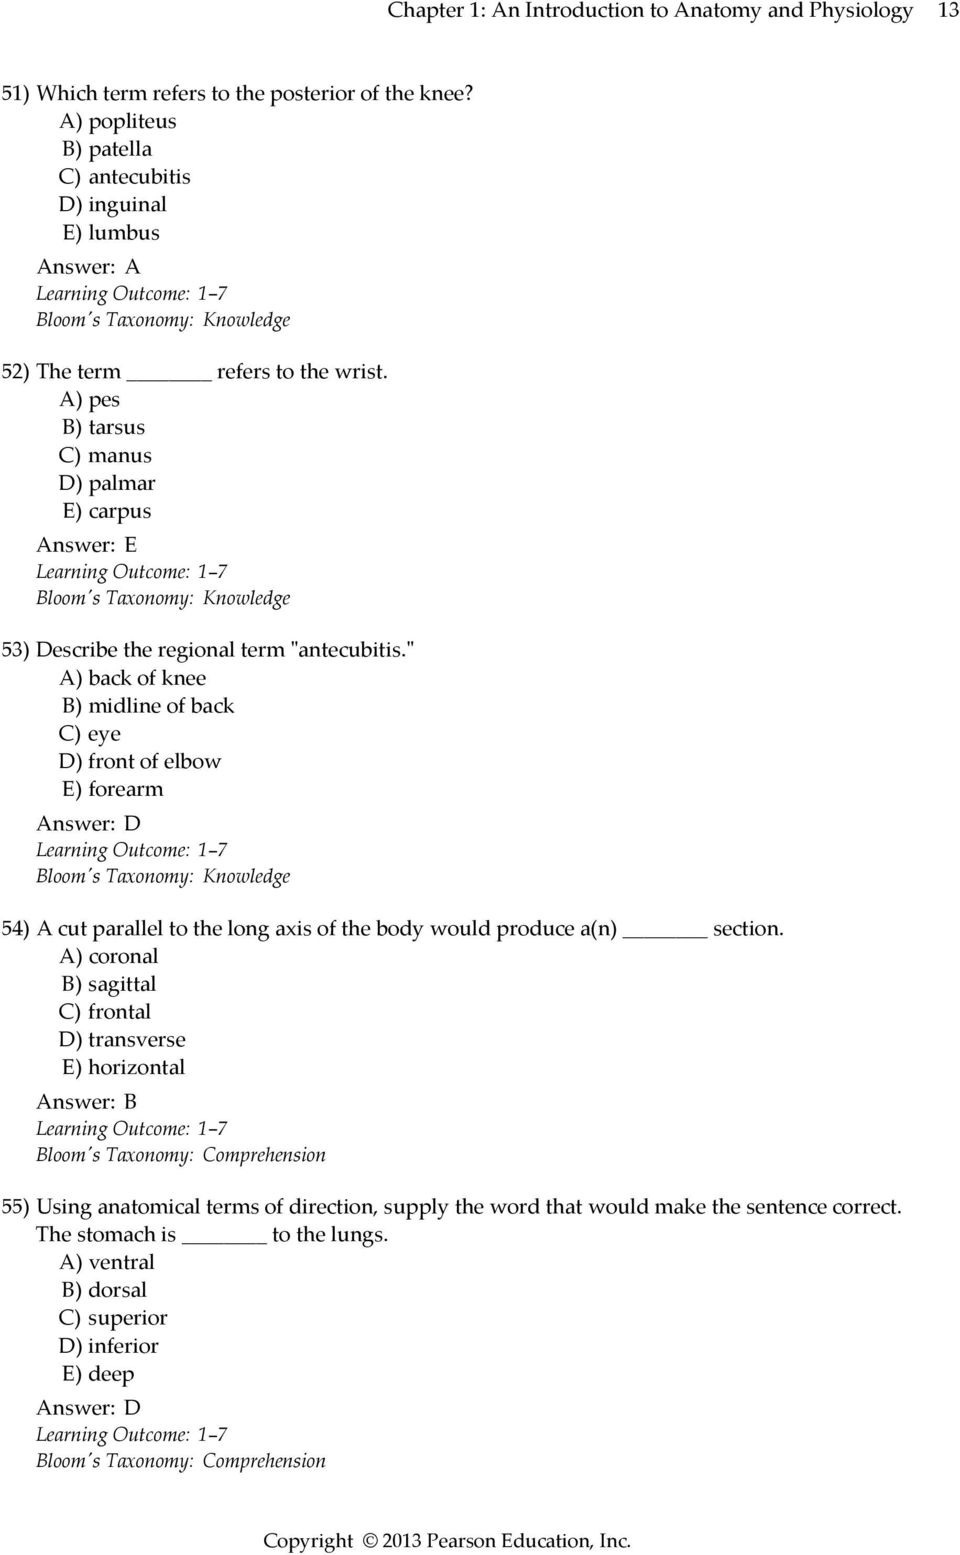 Chapter 1 Introduction To Human Anatomy And Physiology Worksheet 